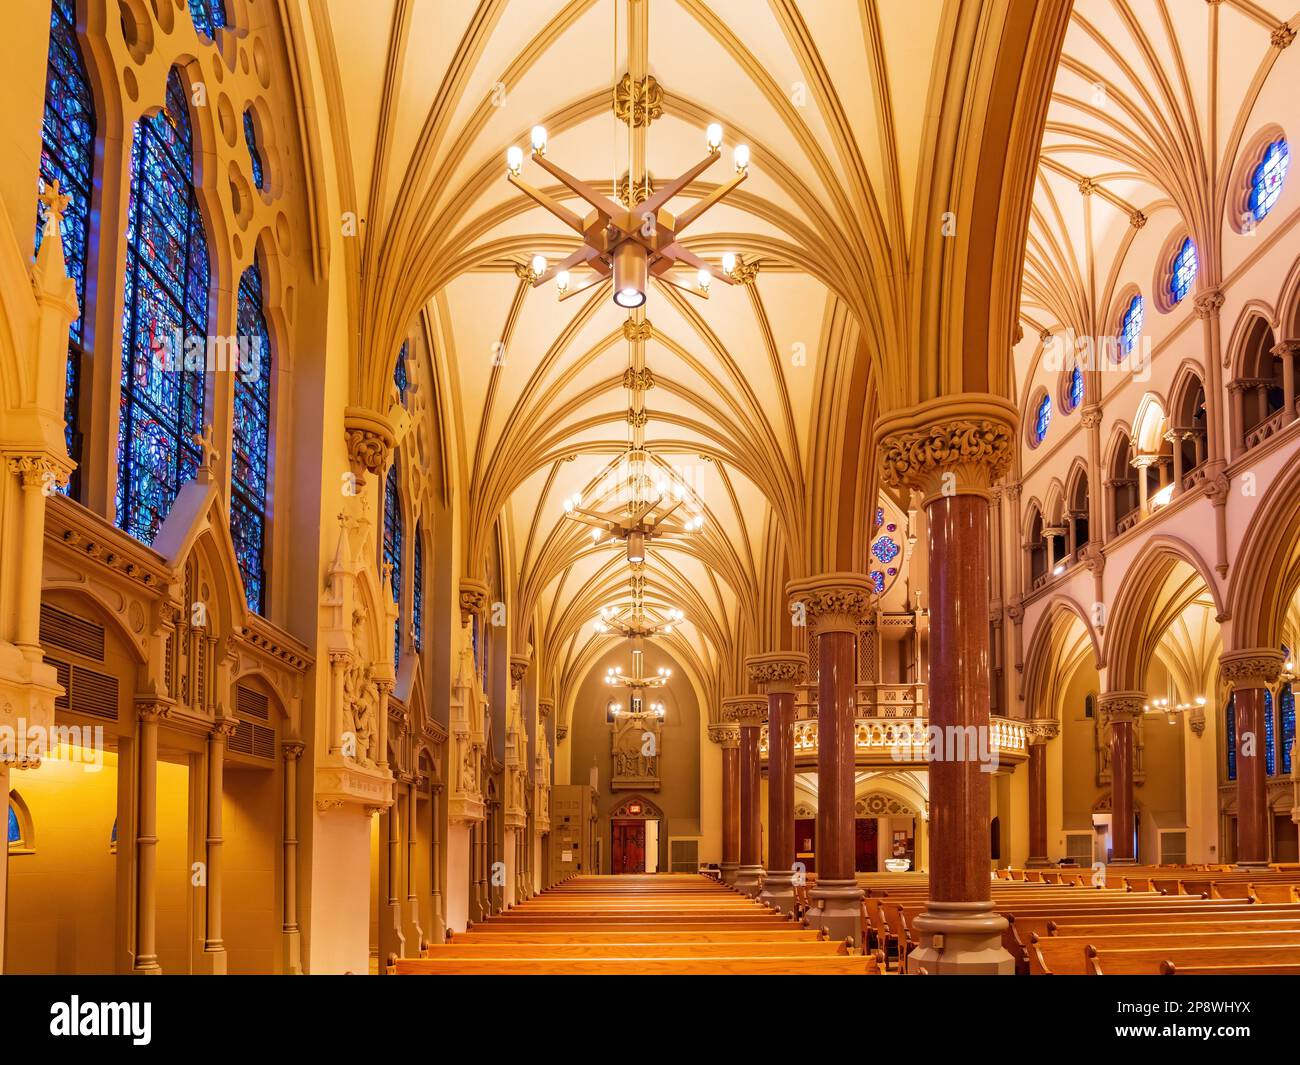 Interior view of the St. Francis Xavier College Church at Missouri Stock Photo